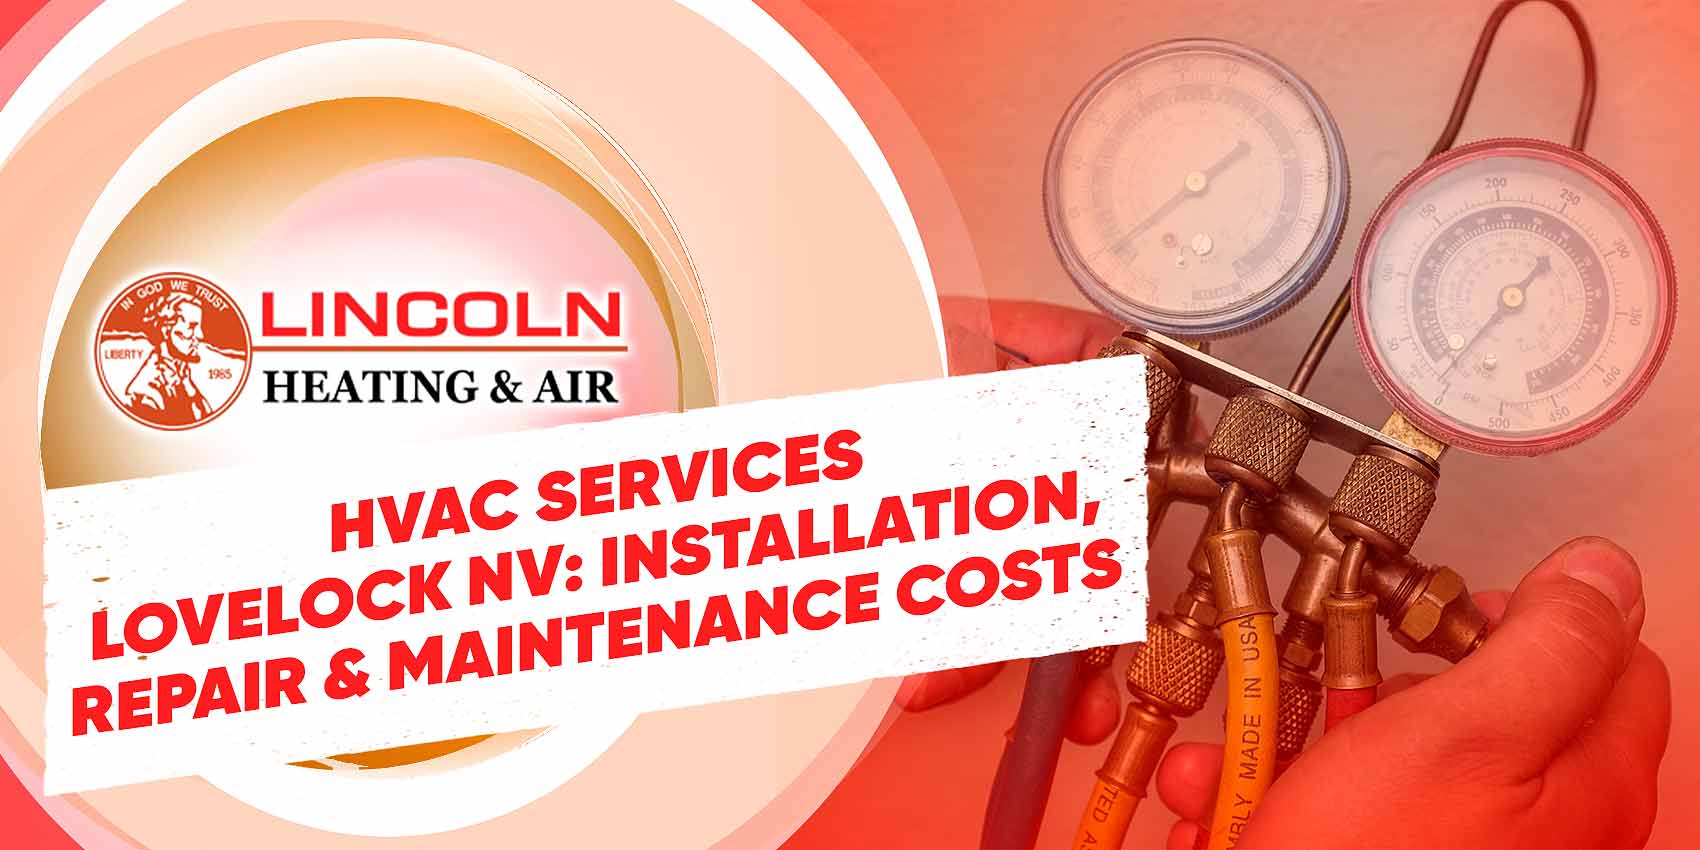 HVAC services for installation, repair and maintenance costs by Lincoln Heating and Air